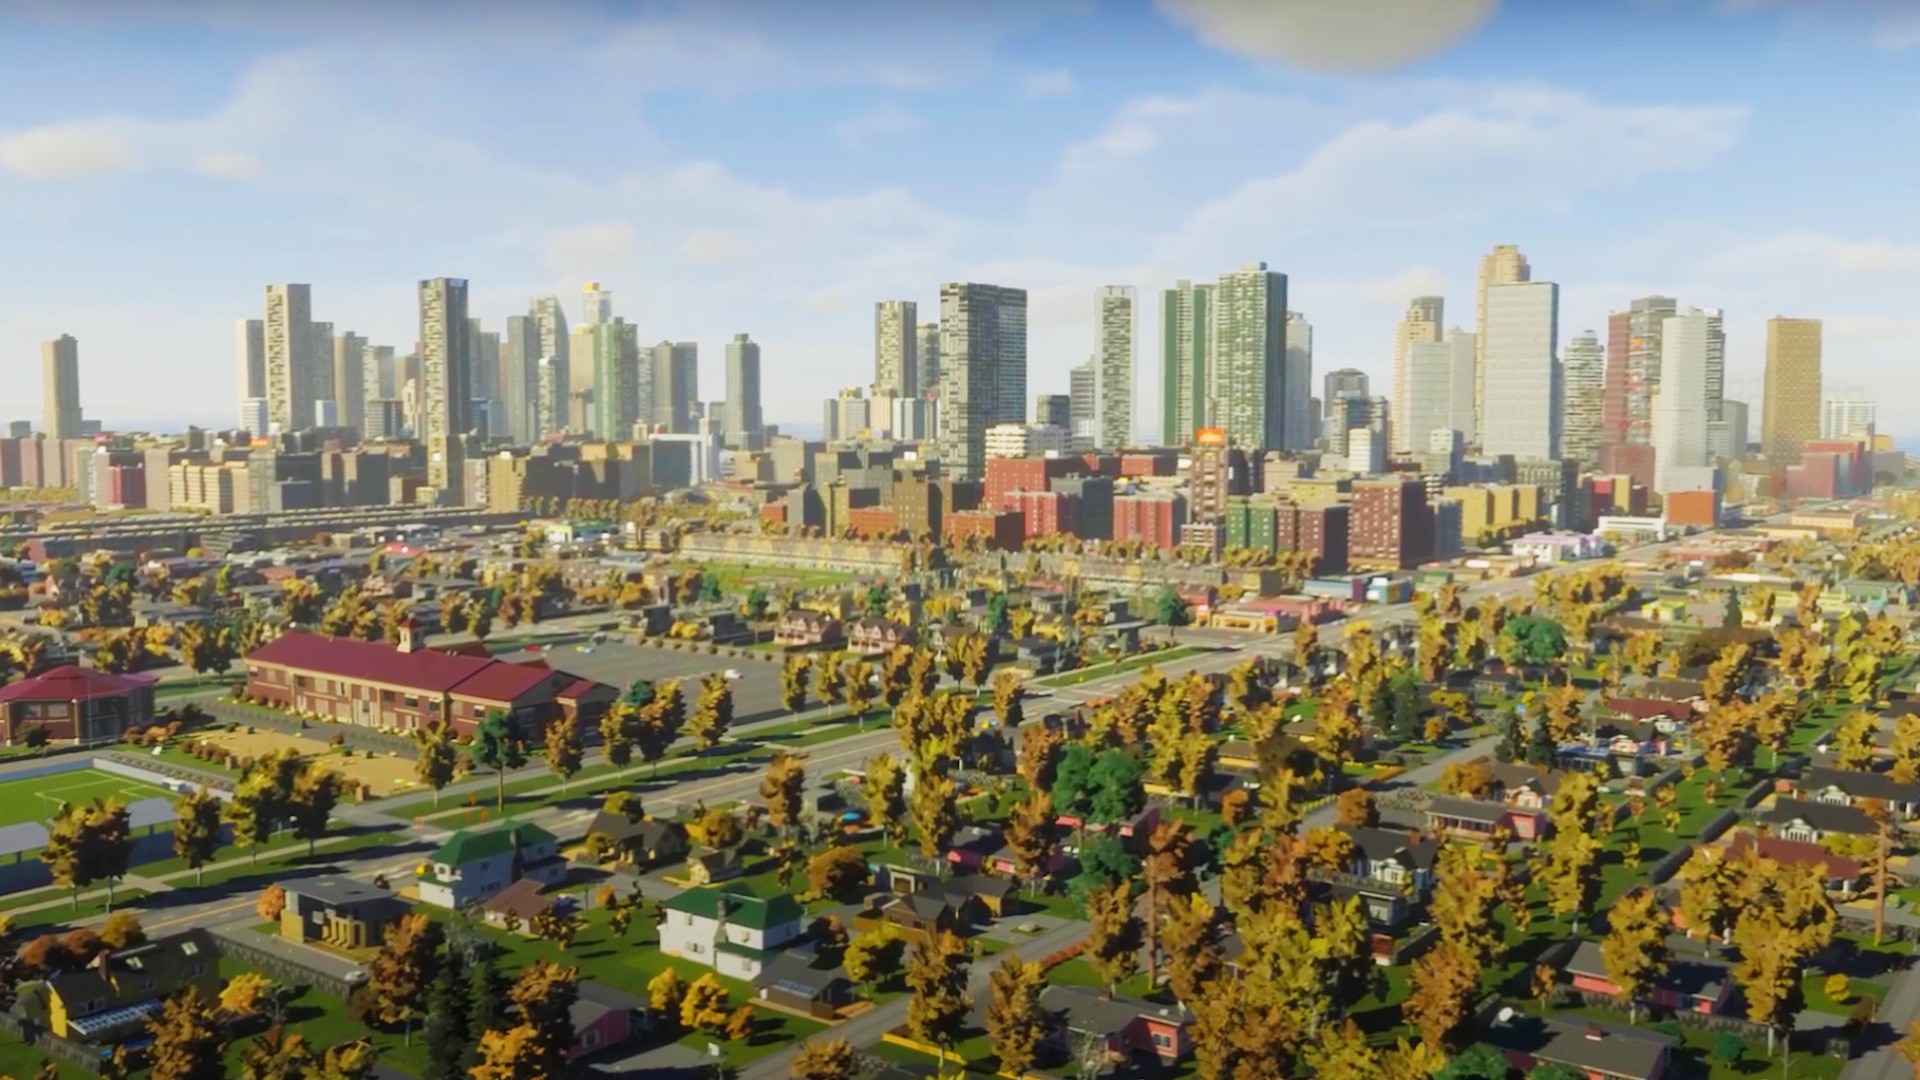 Cities Skylines 2 Economy 2.0 update: A big town from city building game Cities Skylines 2